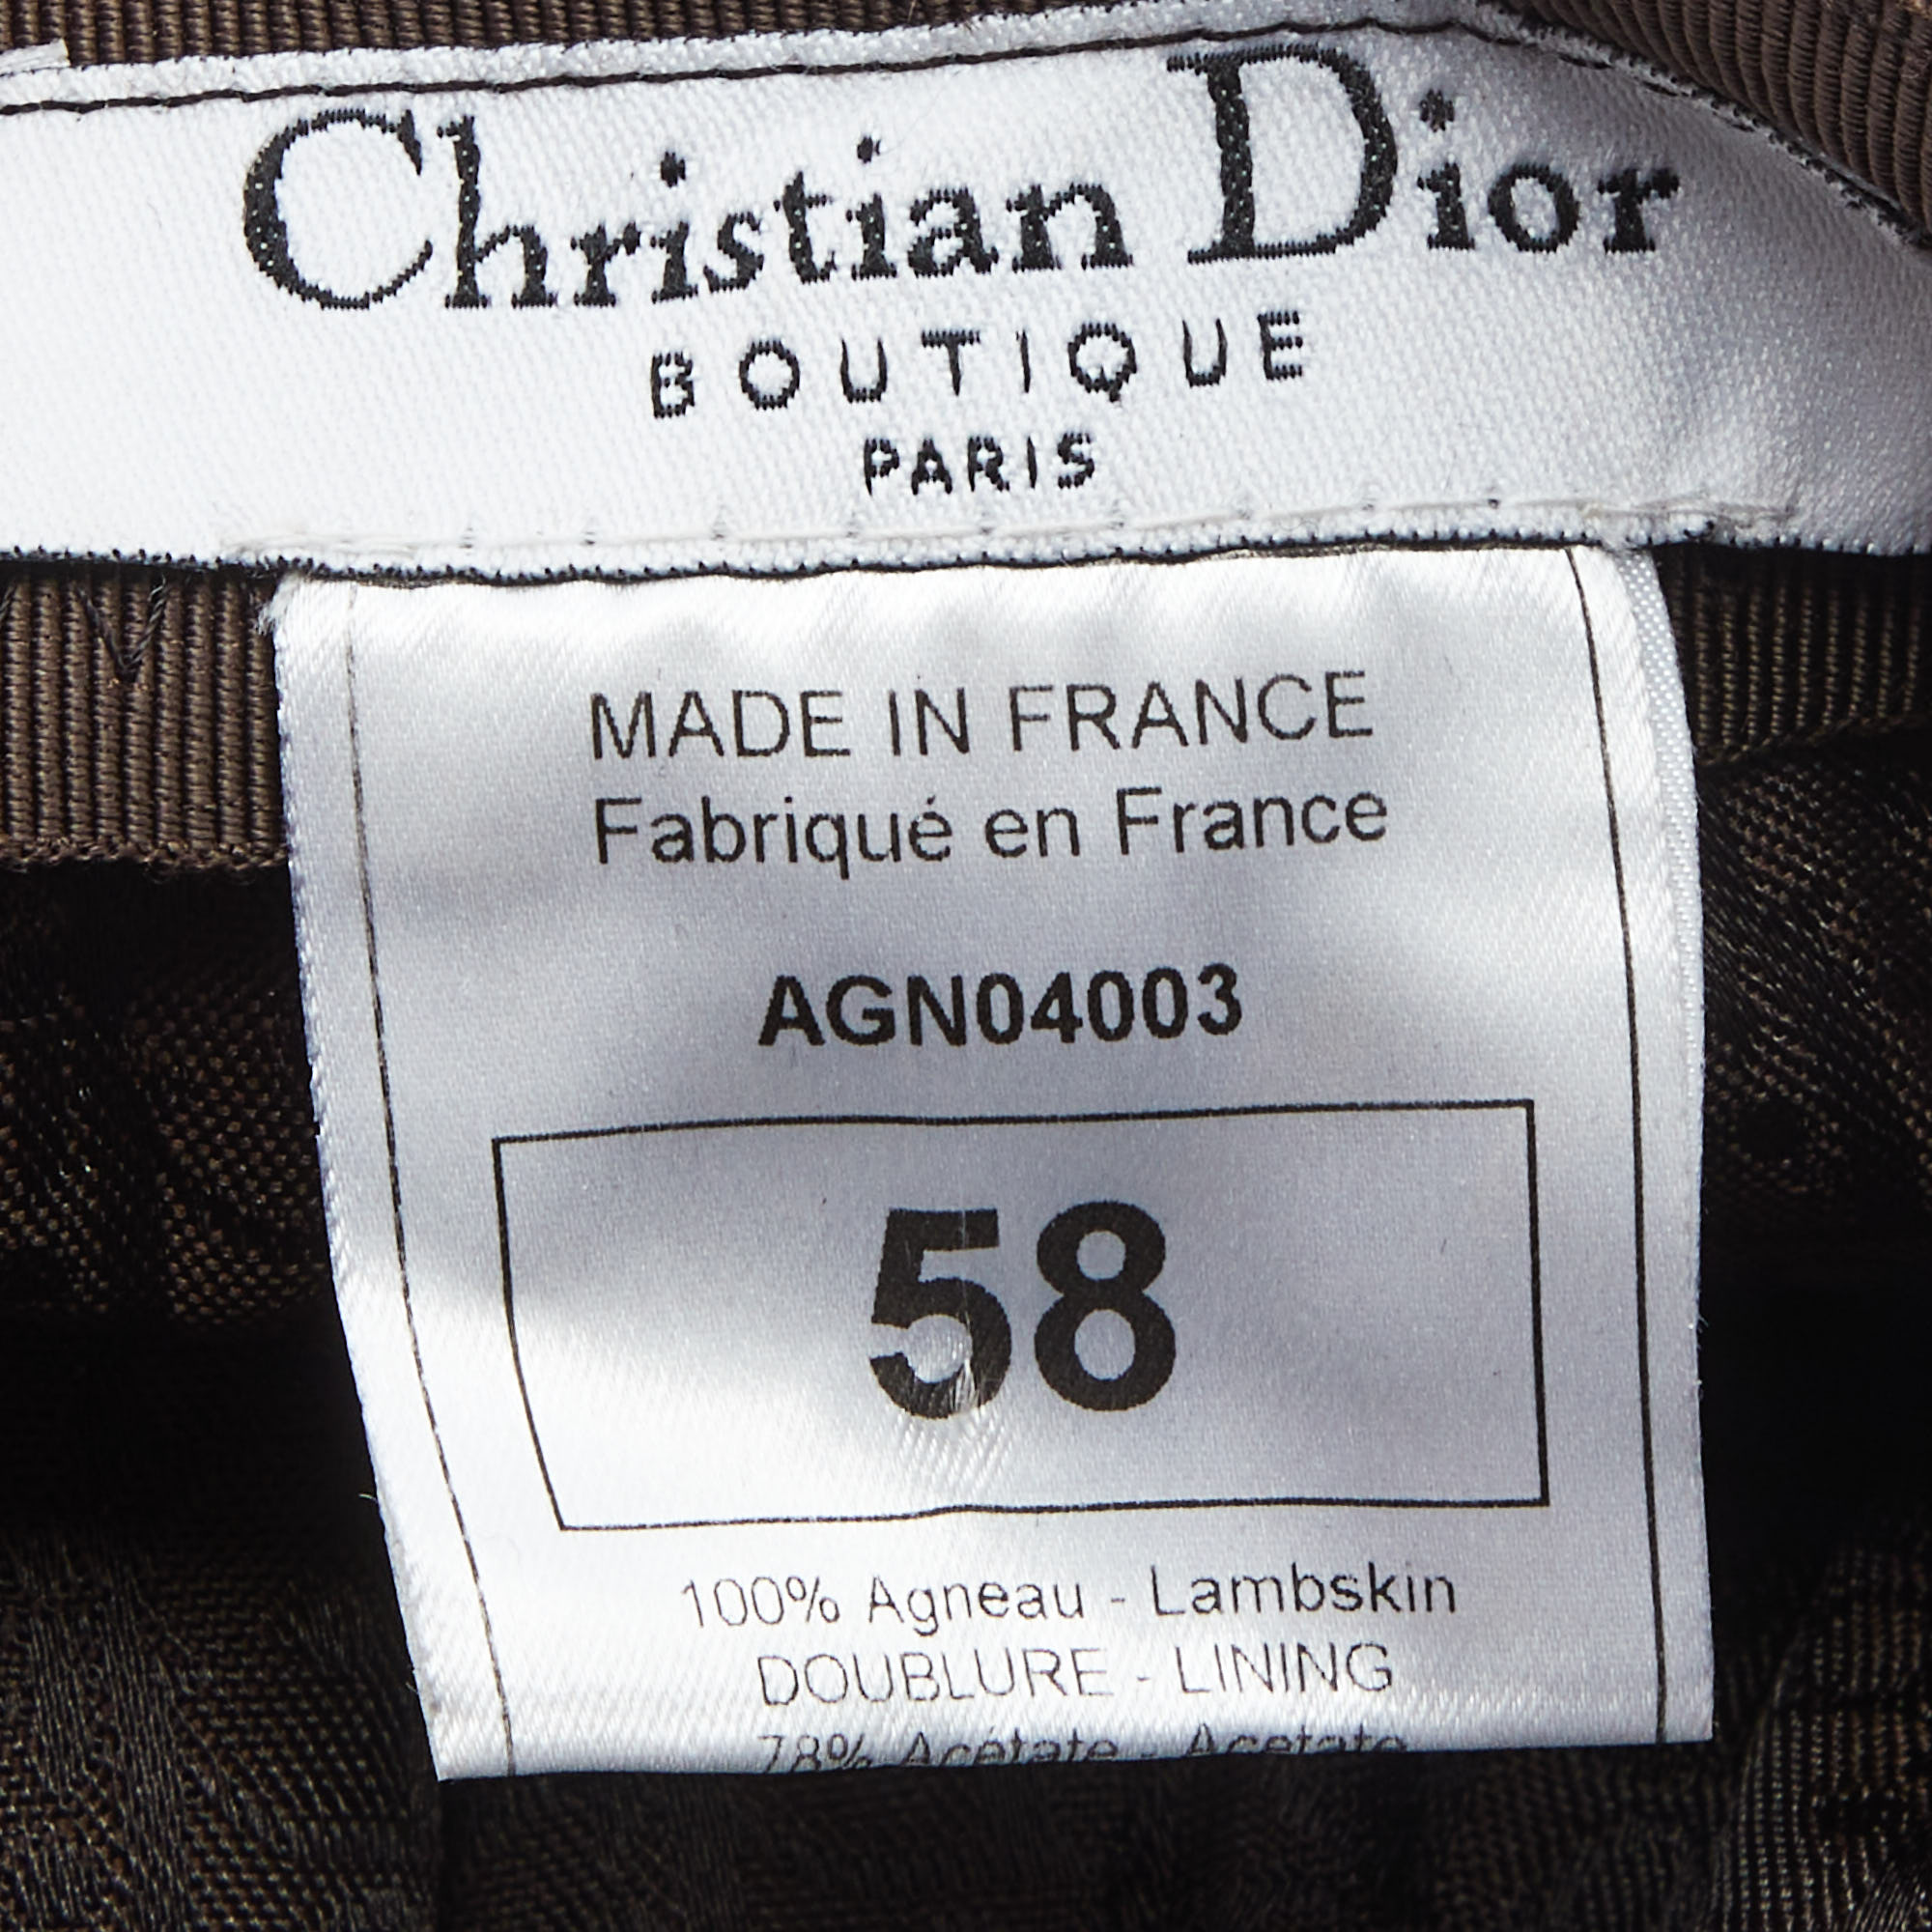 Christian Dior Boutique Brown Croc Embossed Leather Newsboy Hat Size 58